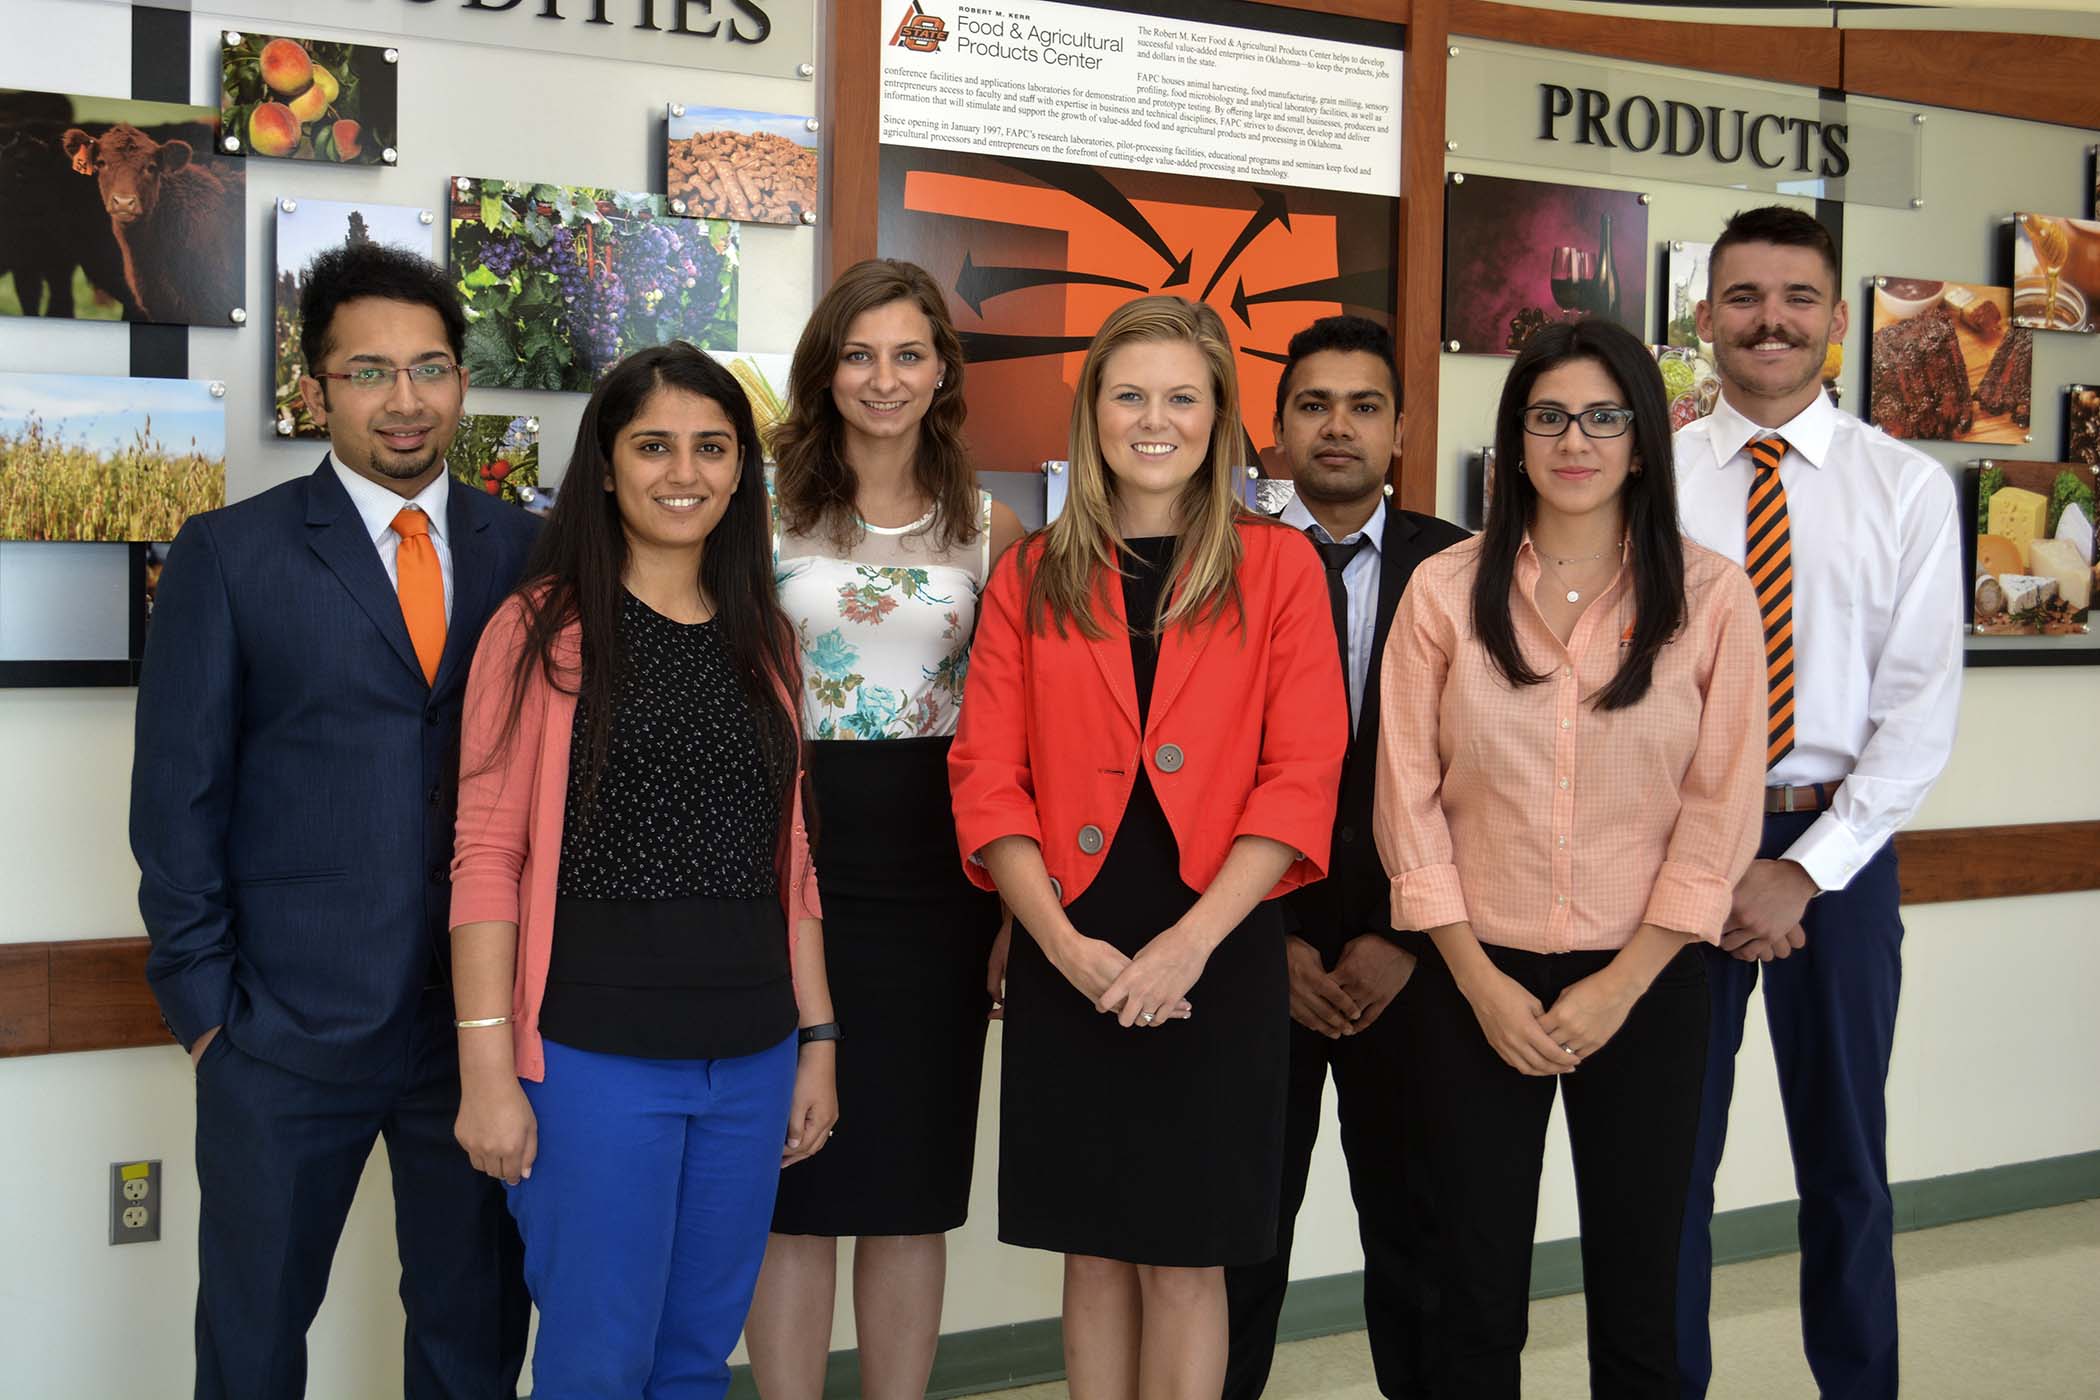 Student group awarded funding to improve research presentation skills